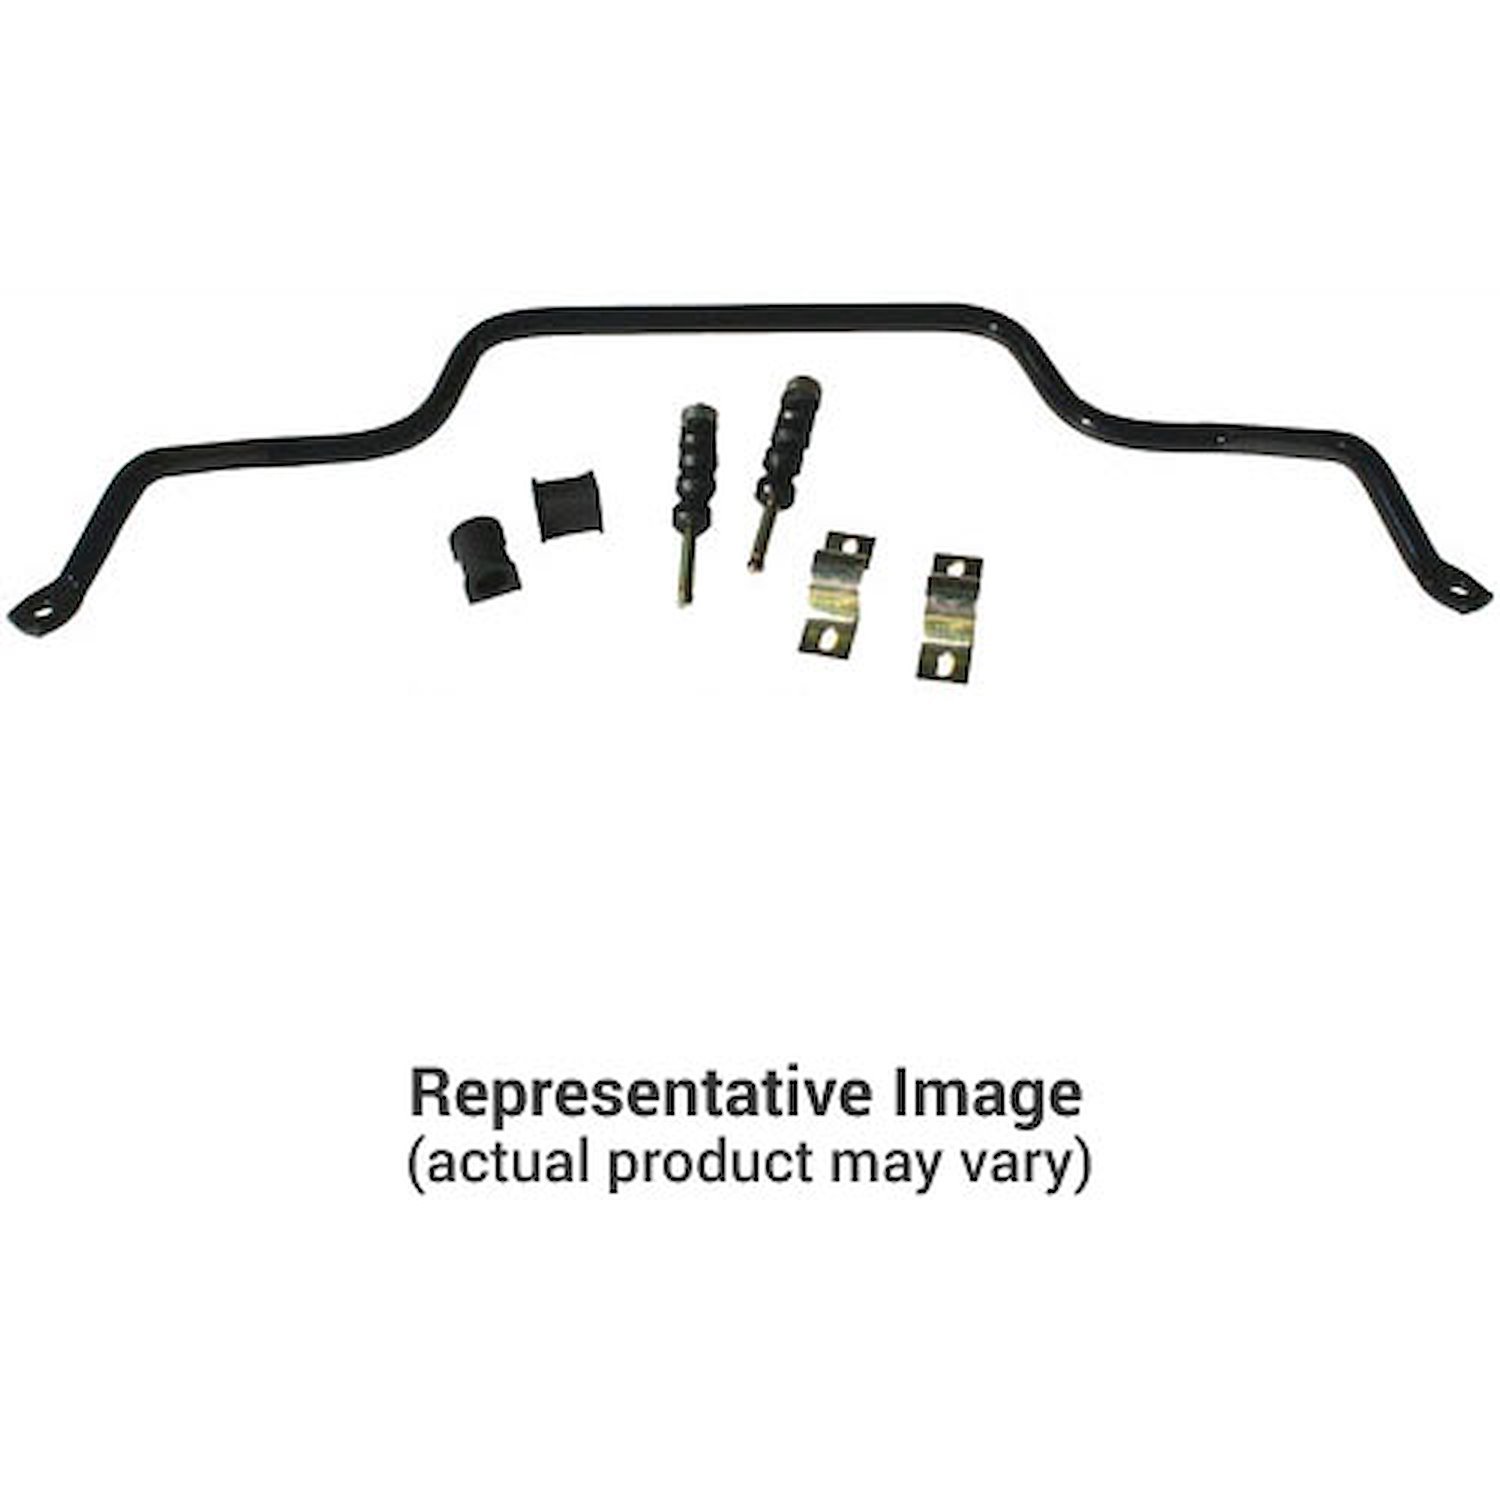 1 3/8" Front Sway Bar 2002-10 Dodge 1500 4WD